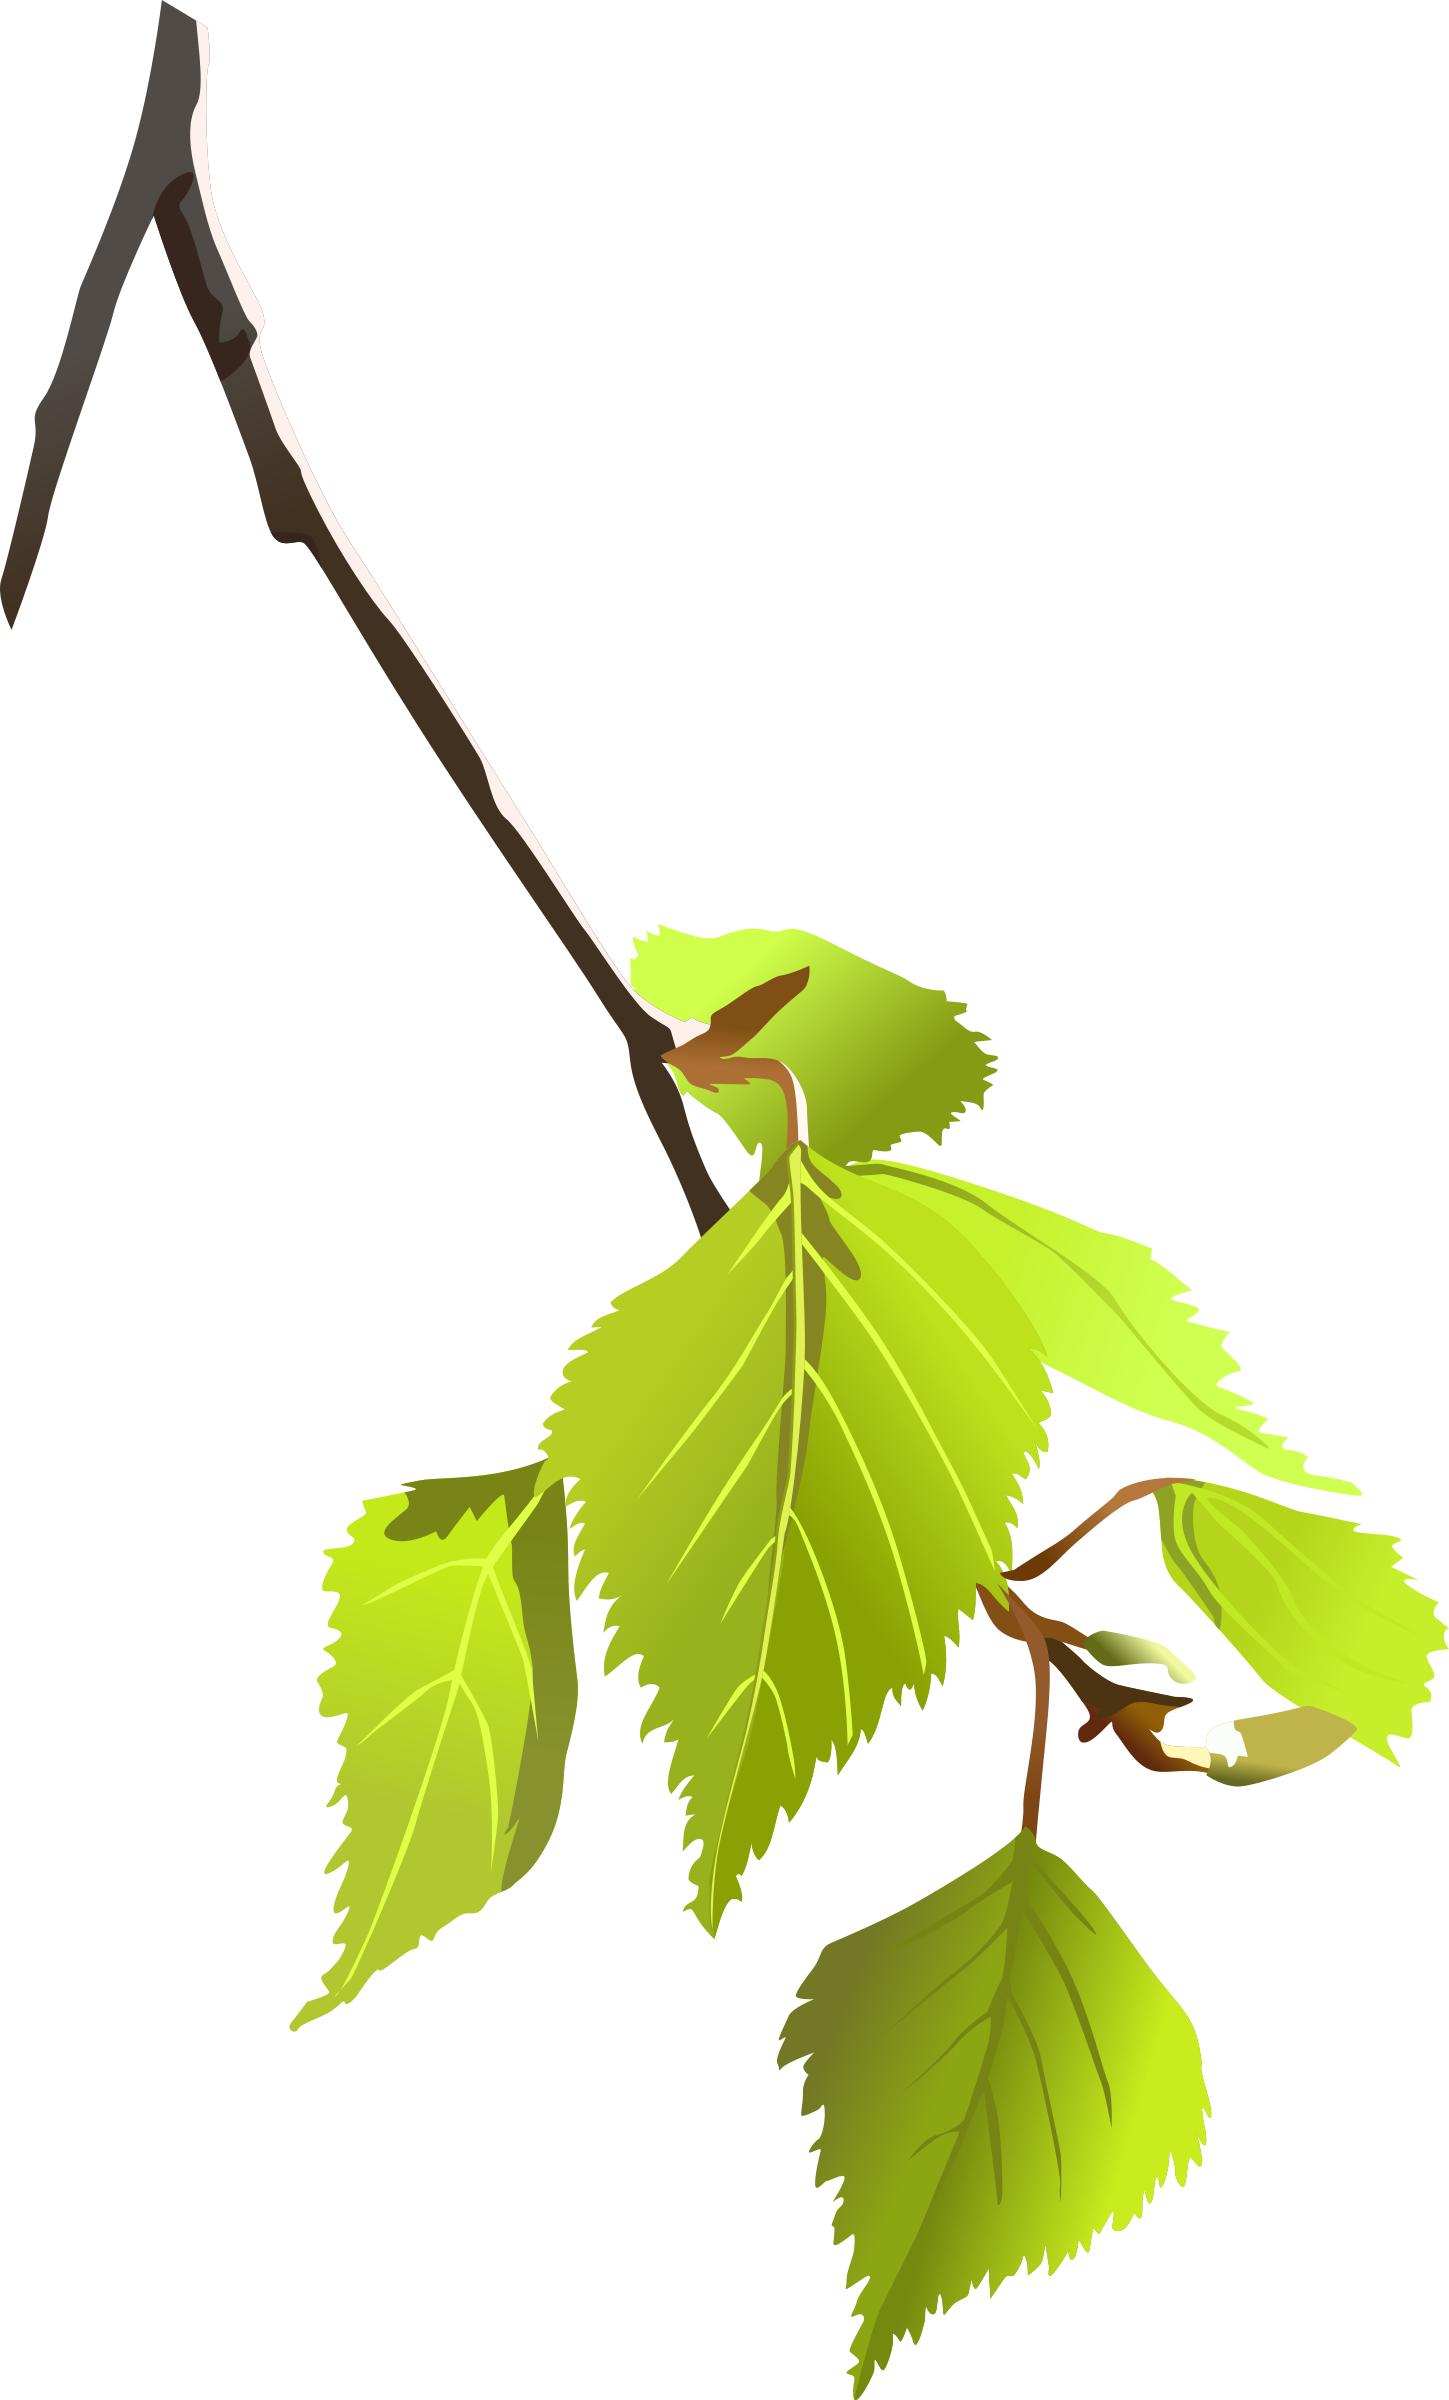 Birch leafs PNG icons